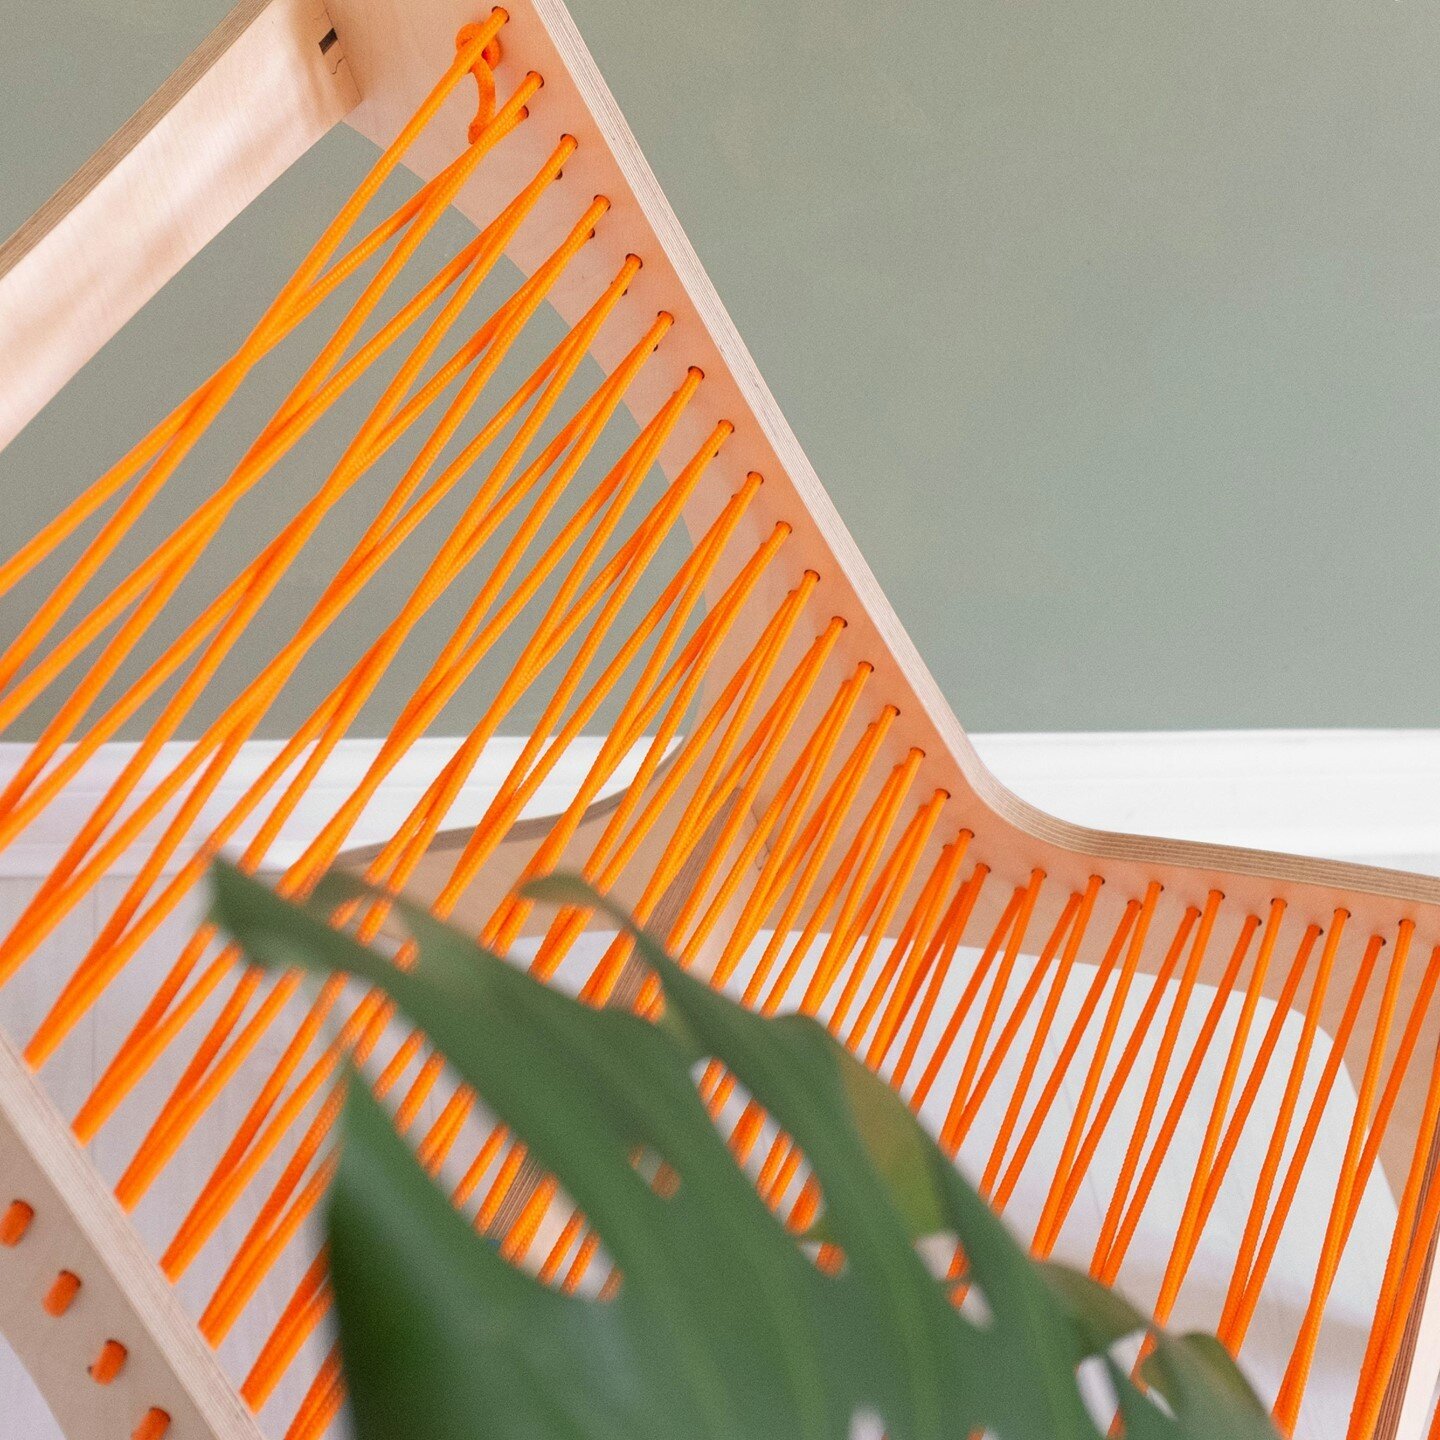 🍊 🍊 🍊 ⠀
⠀
I SPY our original cord chair injecting some sunshine into your home🌞 ⠀
⠀
What do you guys think of the circa orange colour?⠀
⠀
#orange #cordchair #loungechair #weekendvibes #birchplyfurniture #selfassembly #designedbyus #madebyus #desi